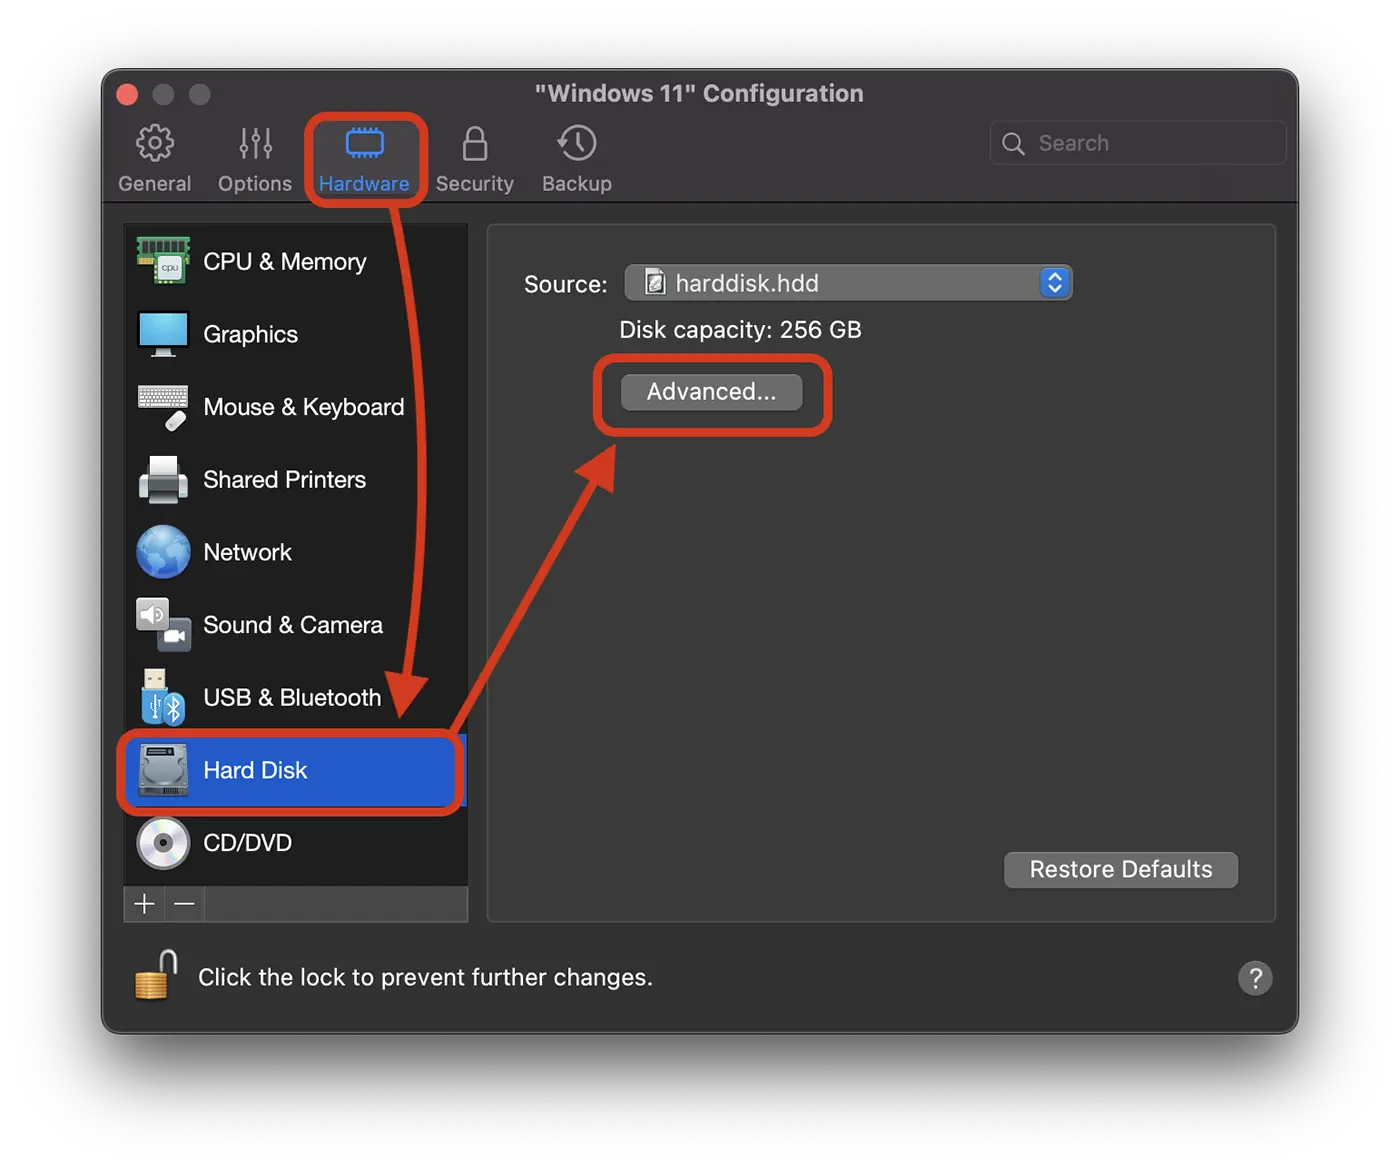 Windows 11 Hardware Settings in Parallels